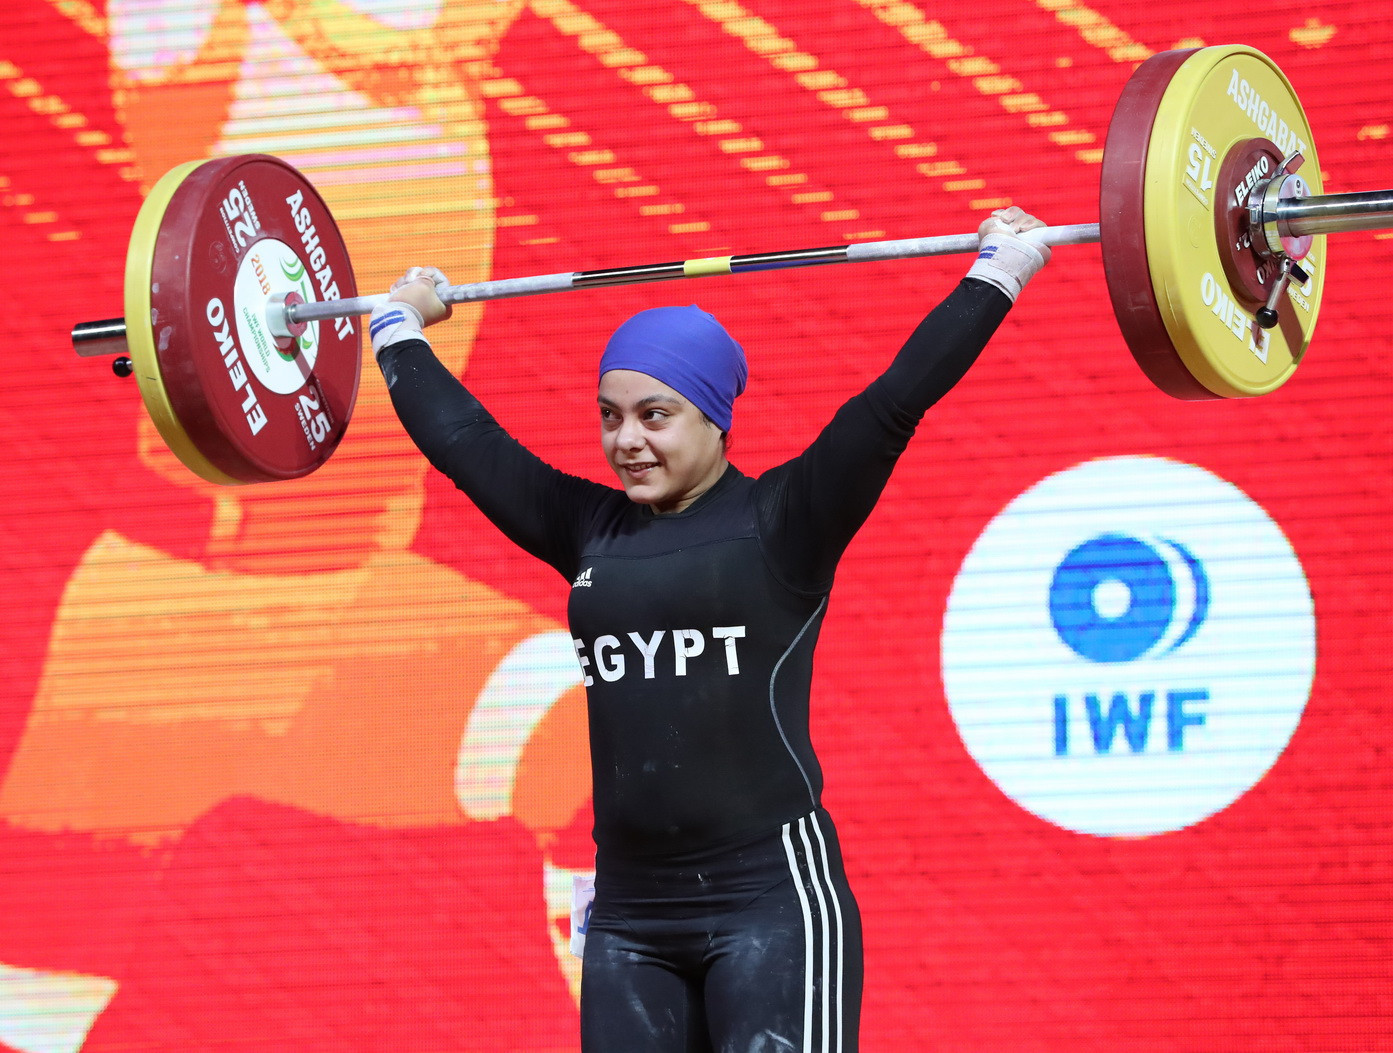 Egypt’s Sara Samir Elsayed Mohamed Ahmed finished second in the total with a world junior standard-breaking 252kg ©IWF